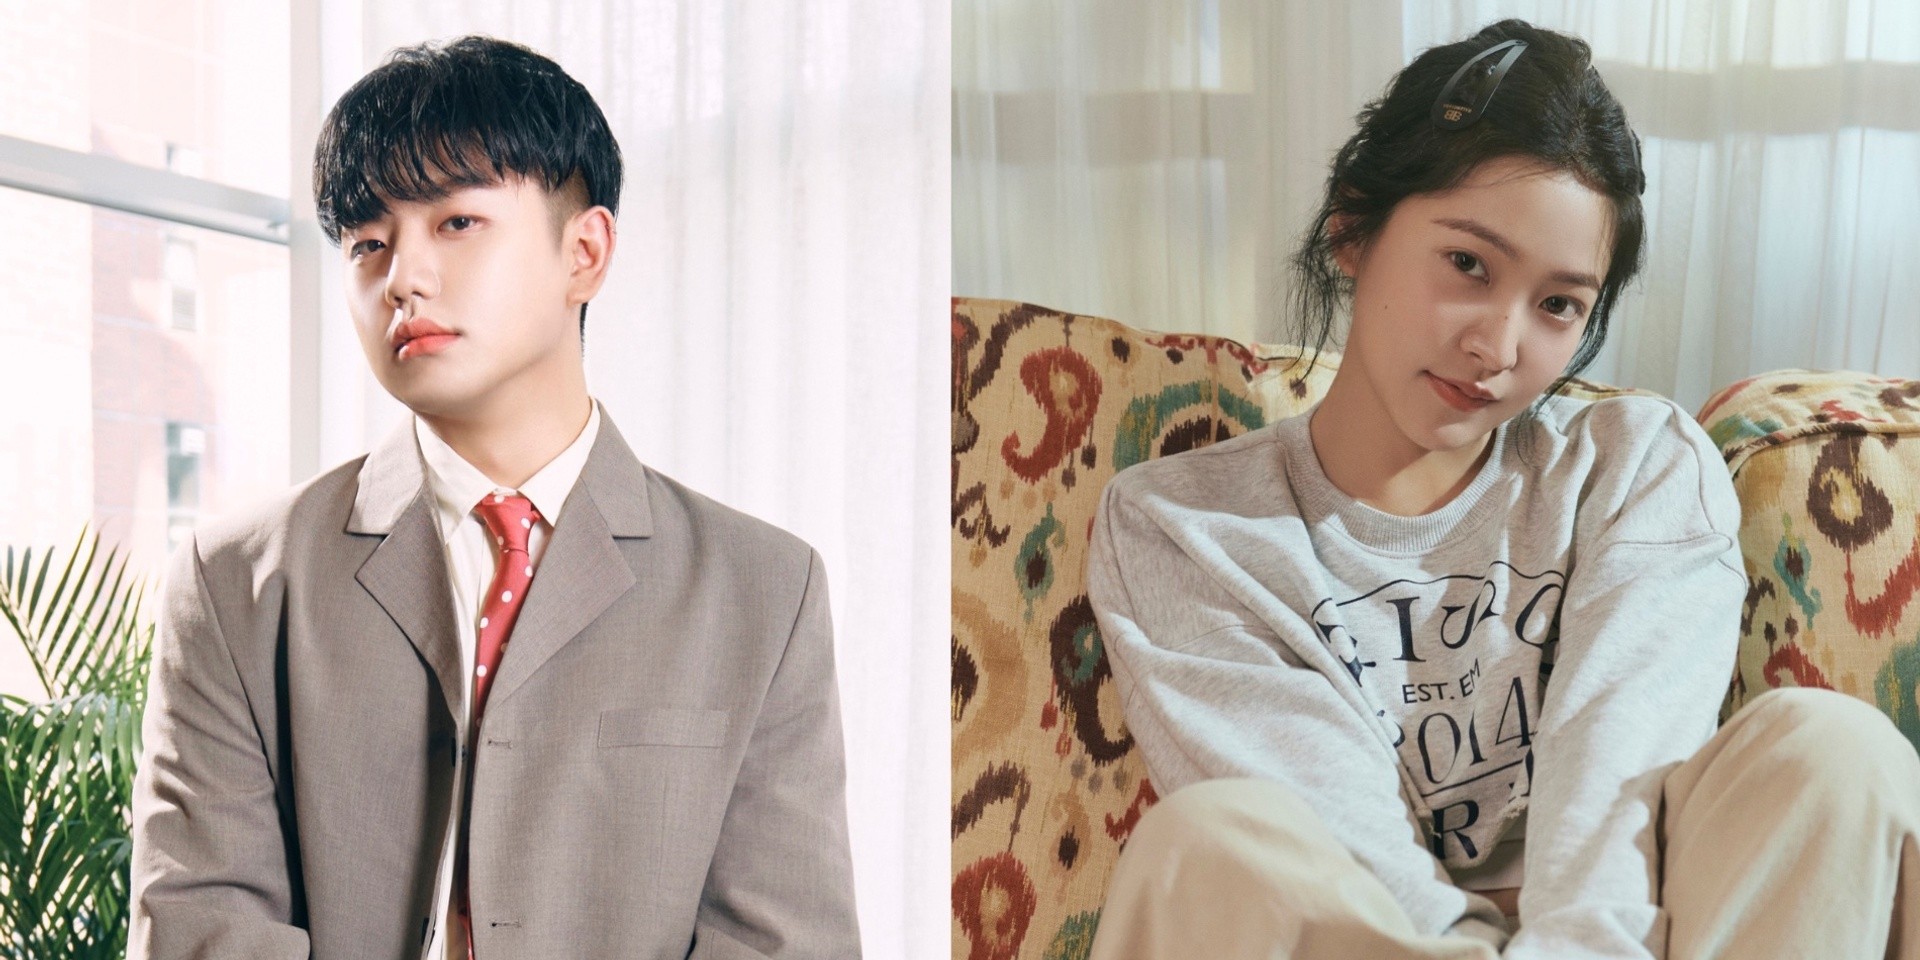 Sam Kim and Red Velvet's Yeri to release collaborative single 'Nap Fairy' this August